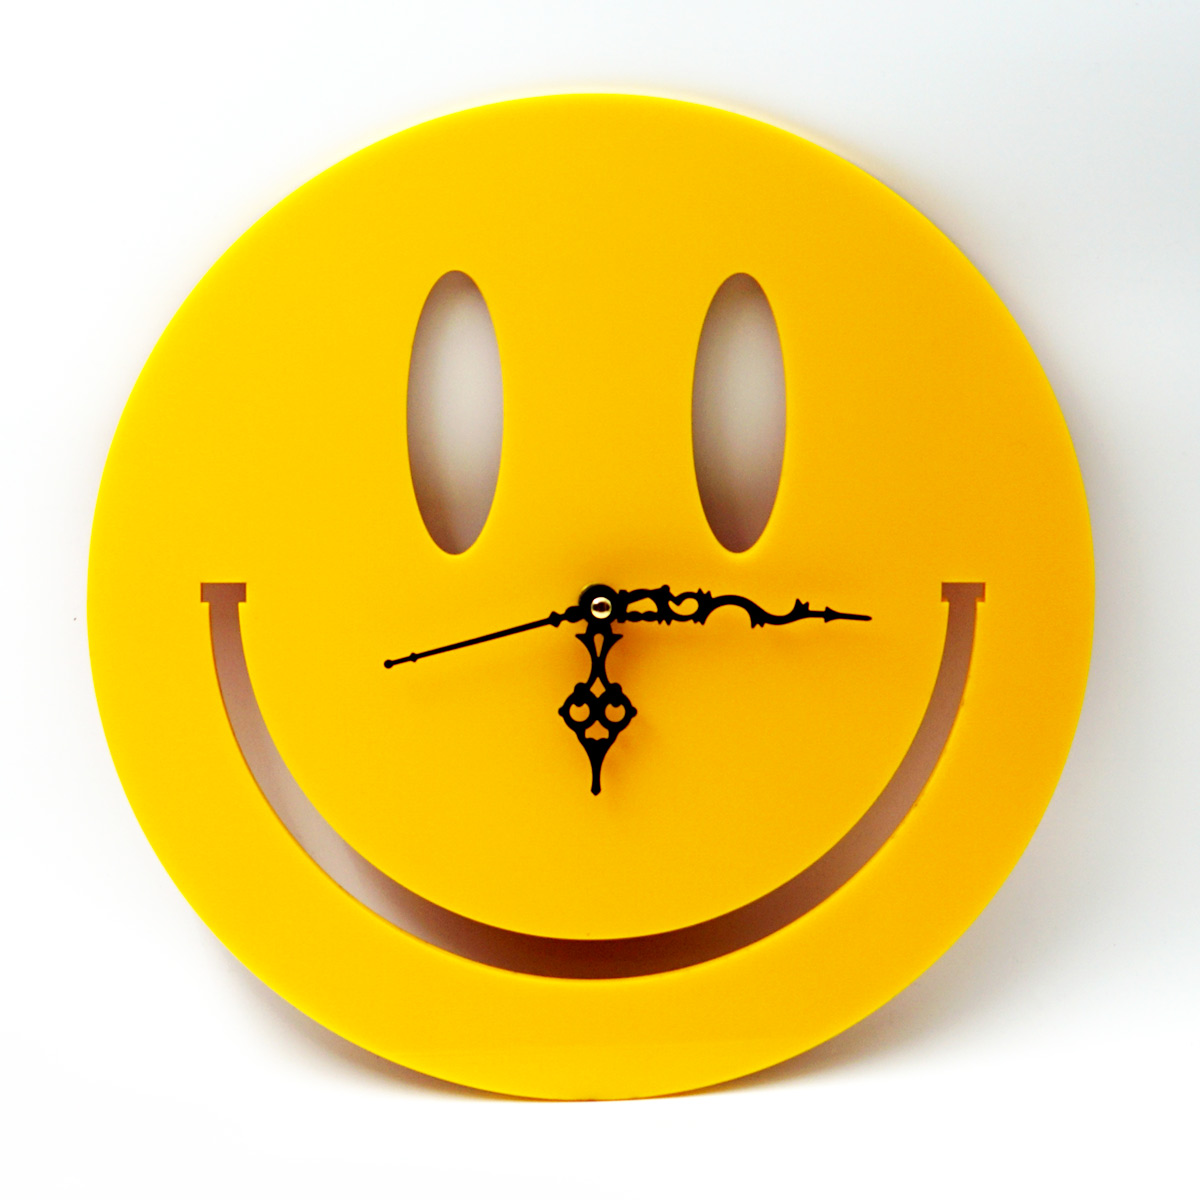 penhouse.in Customizable Acrylic Yellow With Black Color Smile Design Wall Clock SKU ACC026